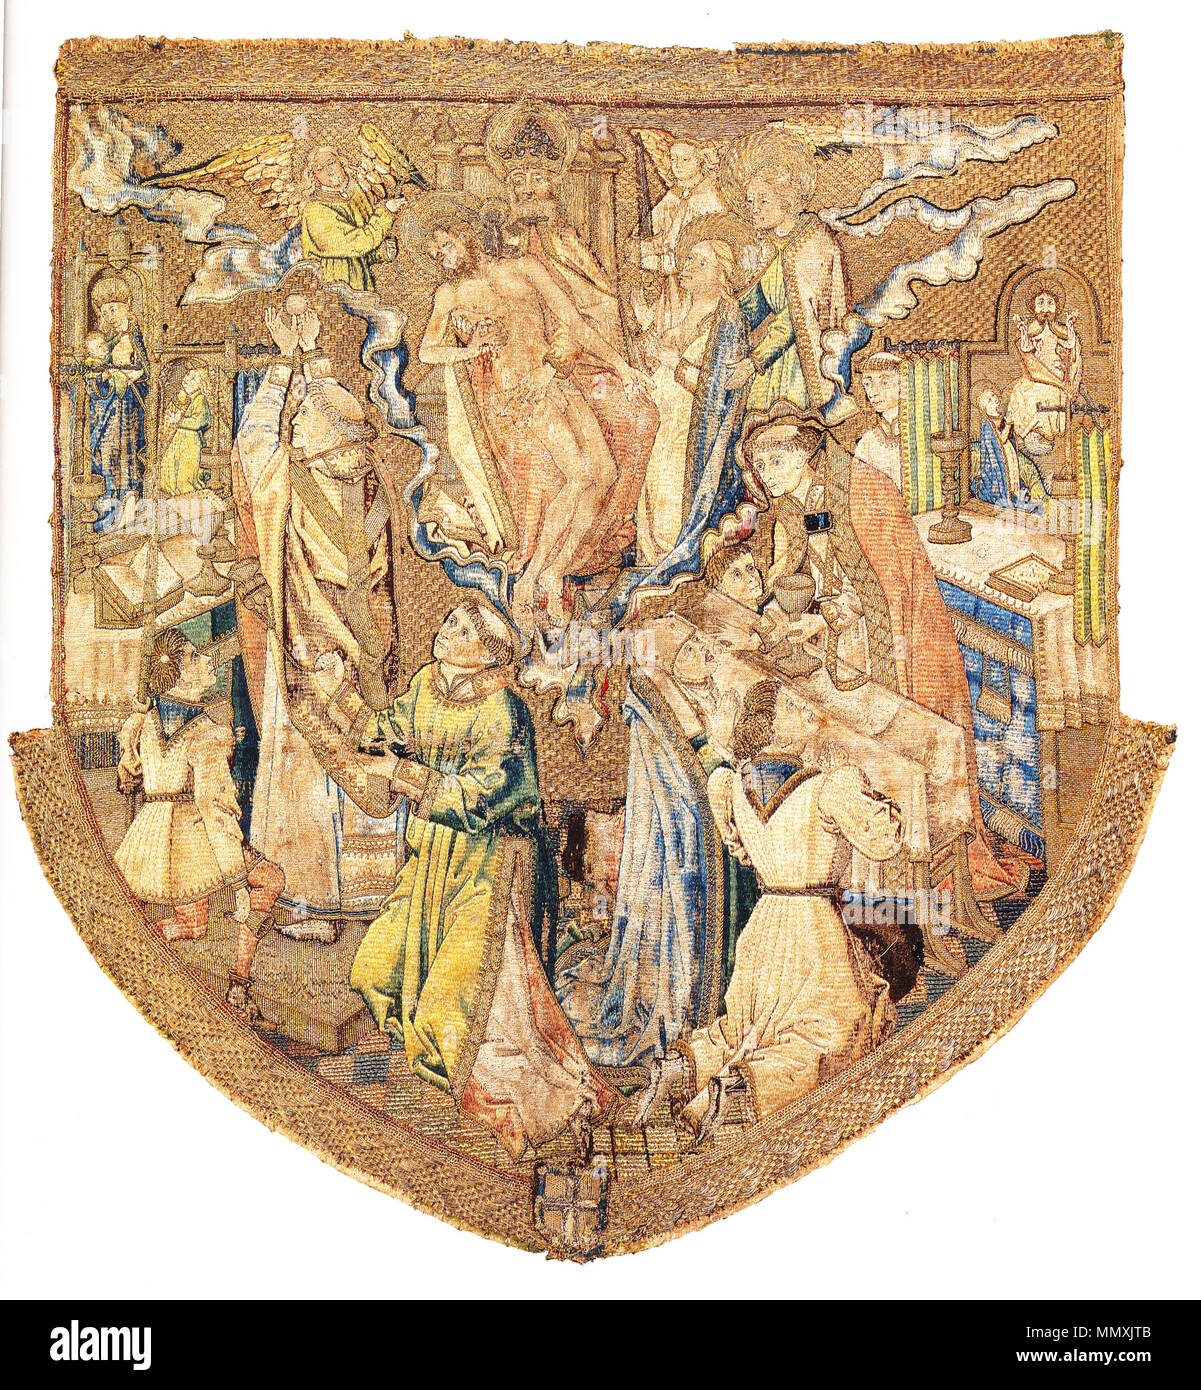 .  English: Tournai or Southern Netherlands, 1463-1478 Embroidery in different techniques, gold thread and silk, shield shaped hood: 55 x 55 cm fragments of orphrey: 46 x 32 cm (each) Historical Museum of Bern , Inv. 308A-B Provenance Embroidered at the commission of Jacques of Savoy (1450-1486), Count of Romont, and presented by him to the Bishop of Lausanne; Lausanne Cathedral Treasury; in 1536, following the Protestant conquest of Lausanne, taken to Bern; since 1882 in the possession of the museum.  . 24 September 2013, 22:26:10. Tournai embroiderer after Rogier van der Weyden Fragment of a Stock Photo